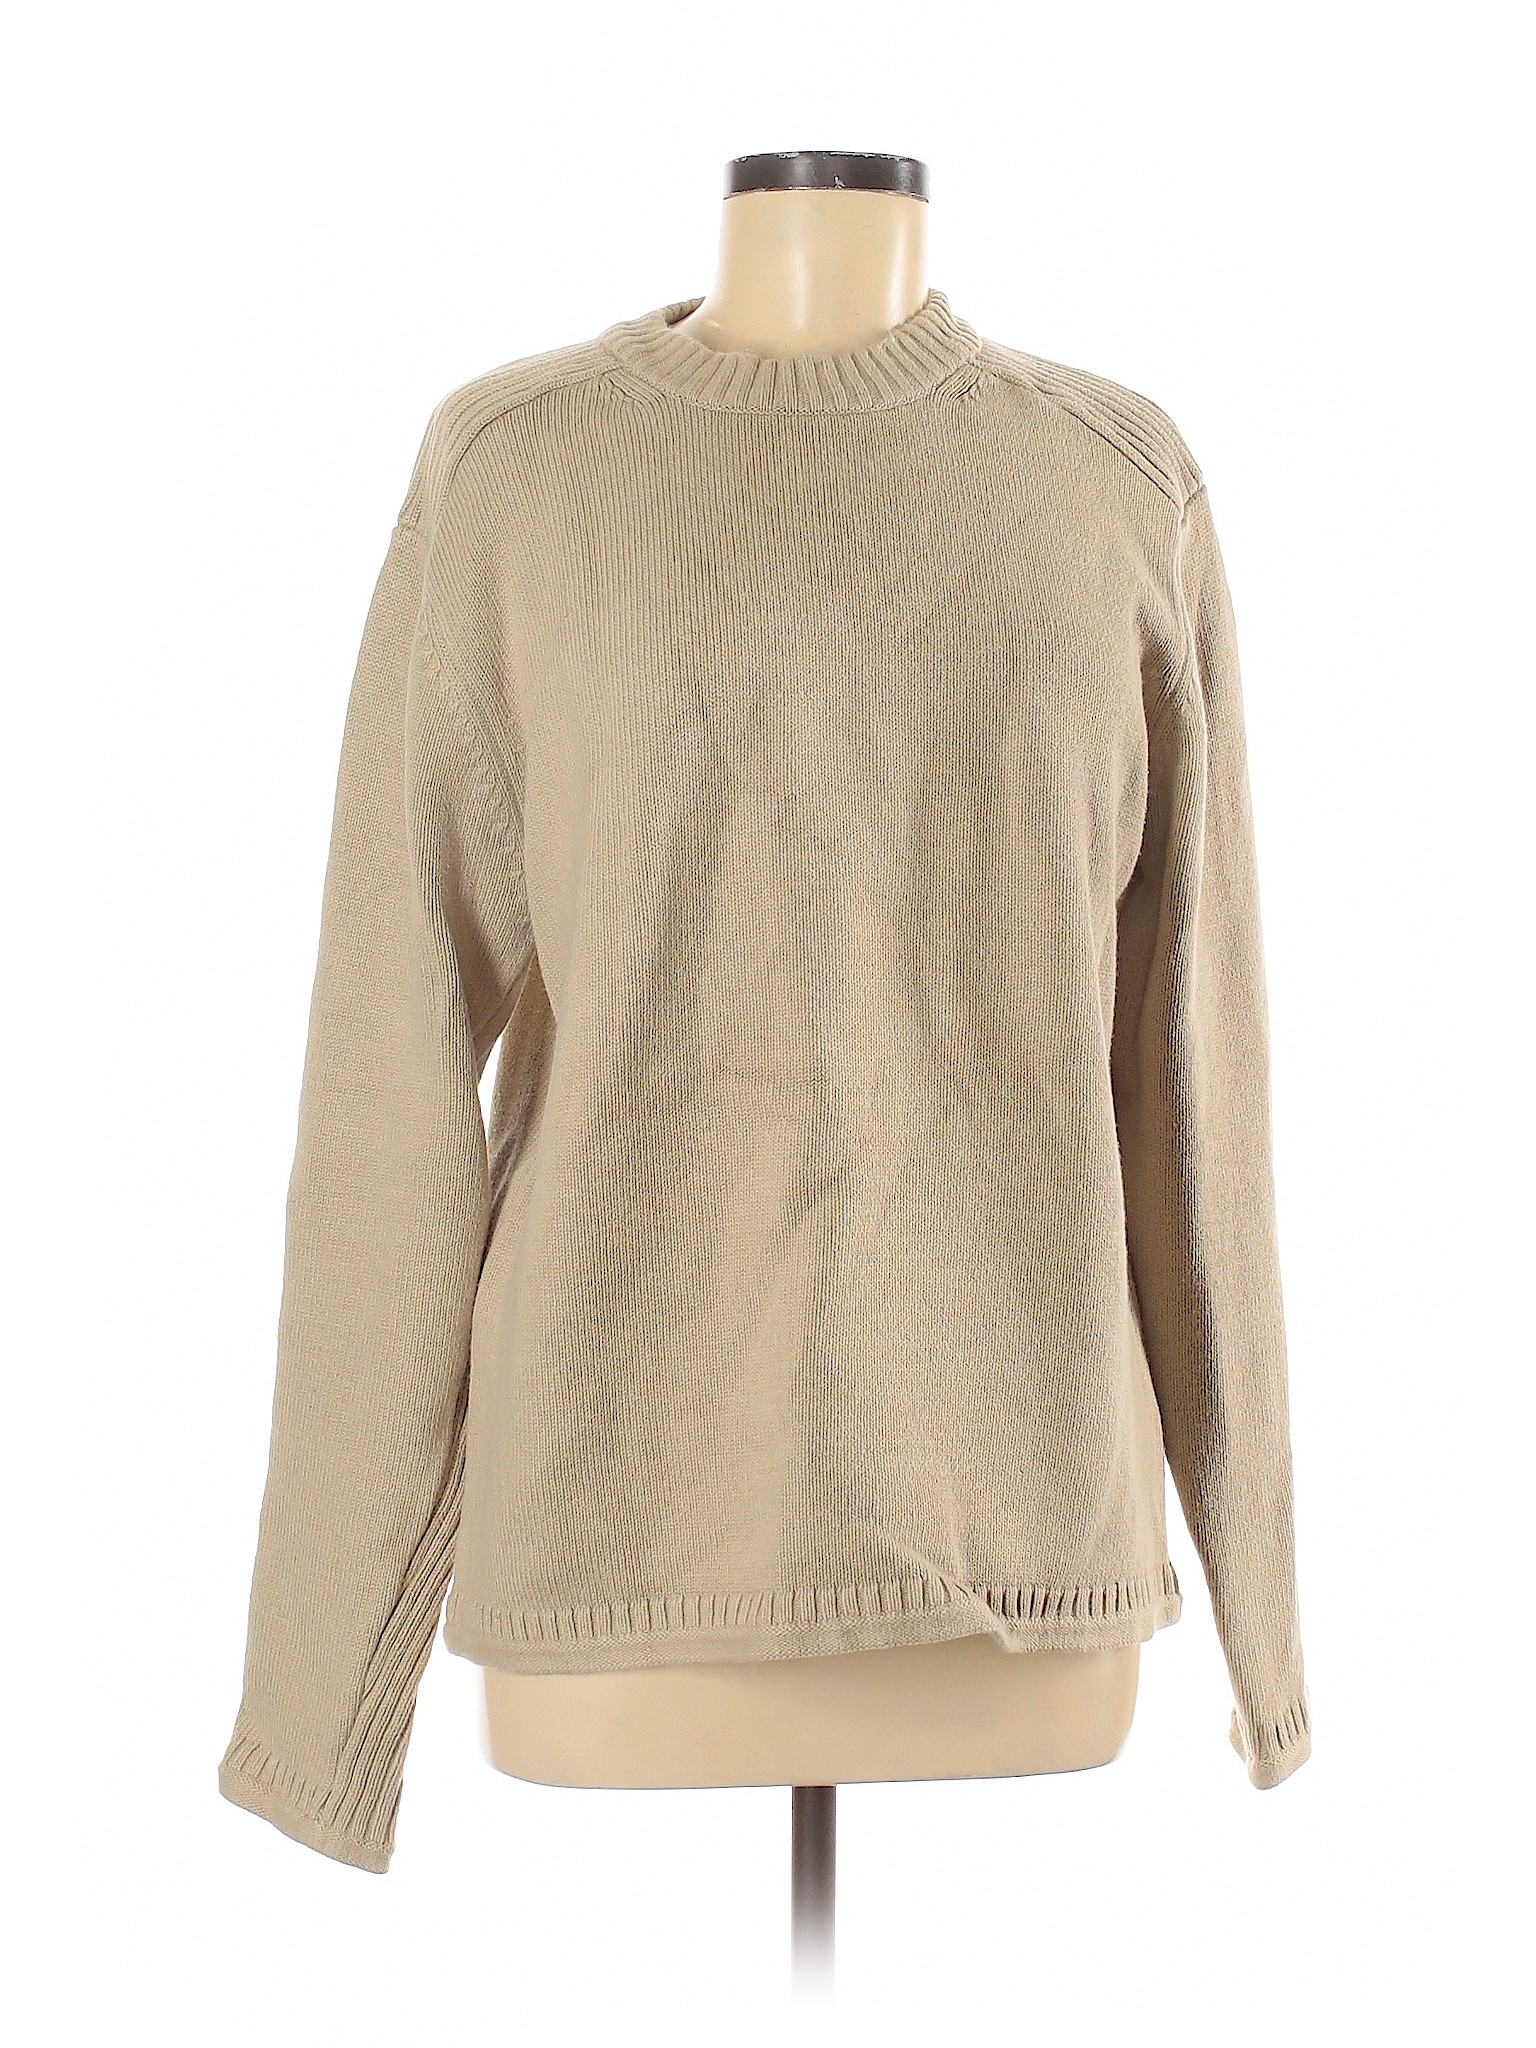 SONOMA life + style Women Brown Pullover Sweater M | eBay